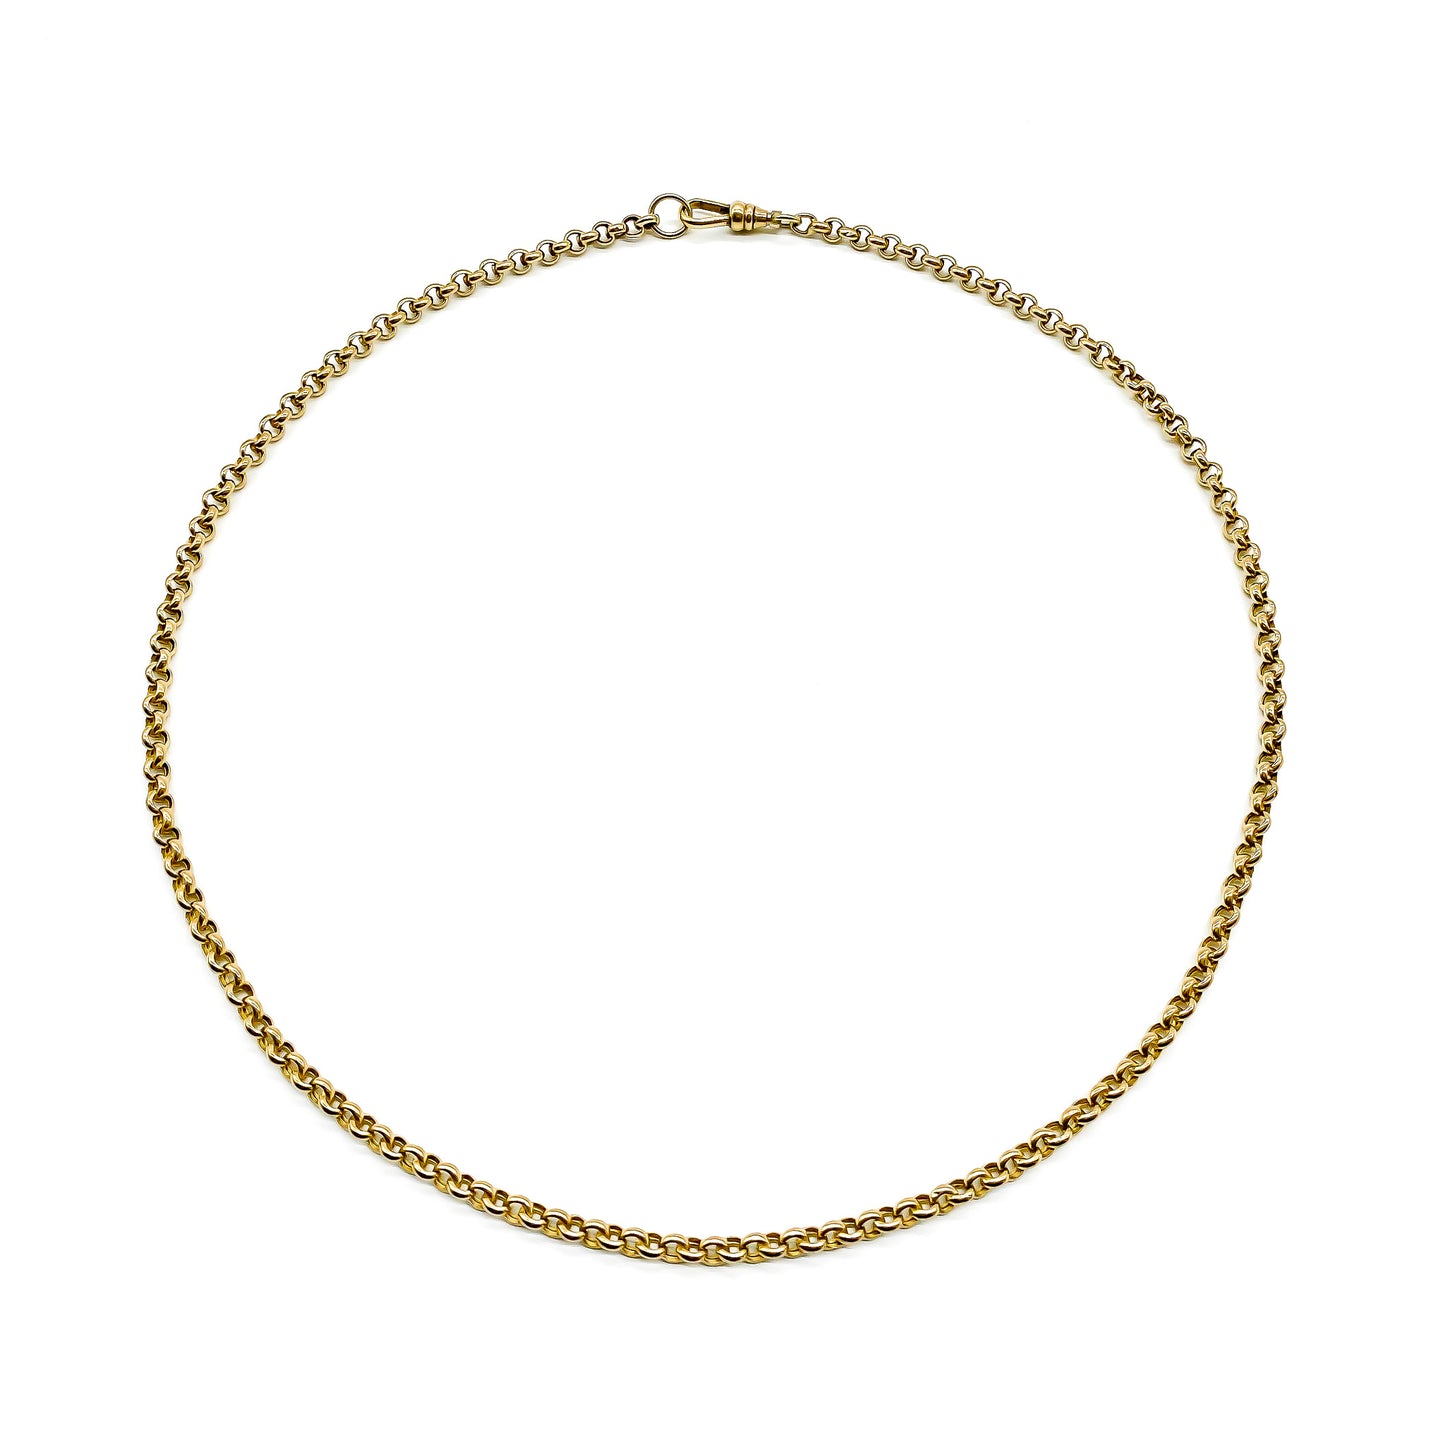 Classic 9ct gold belcher link chain with a dog-clip. 